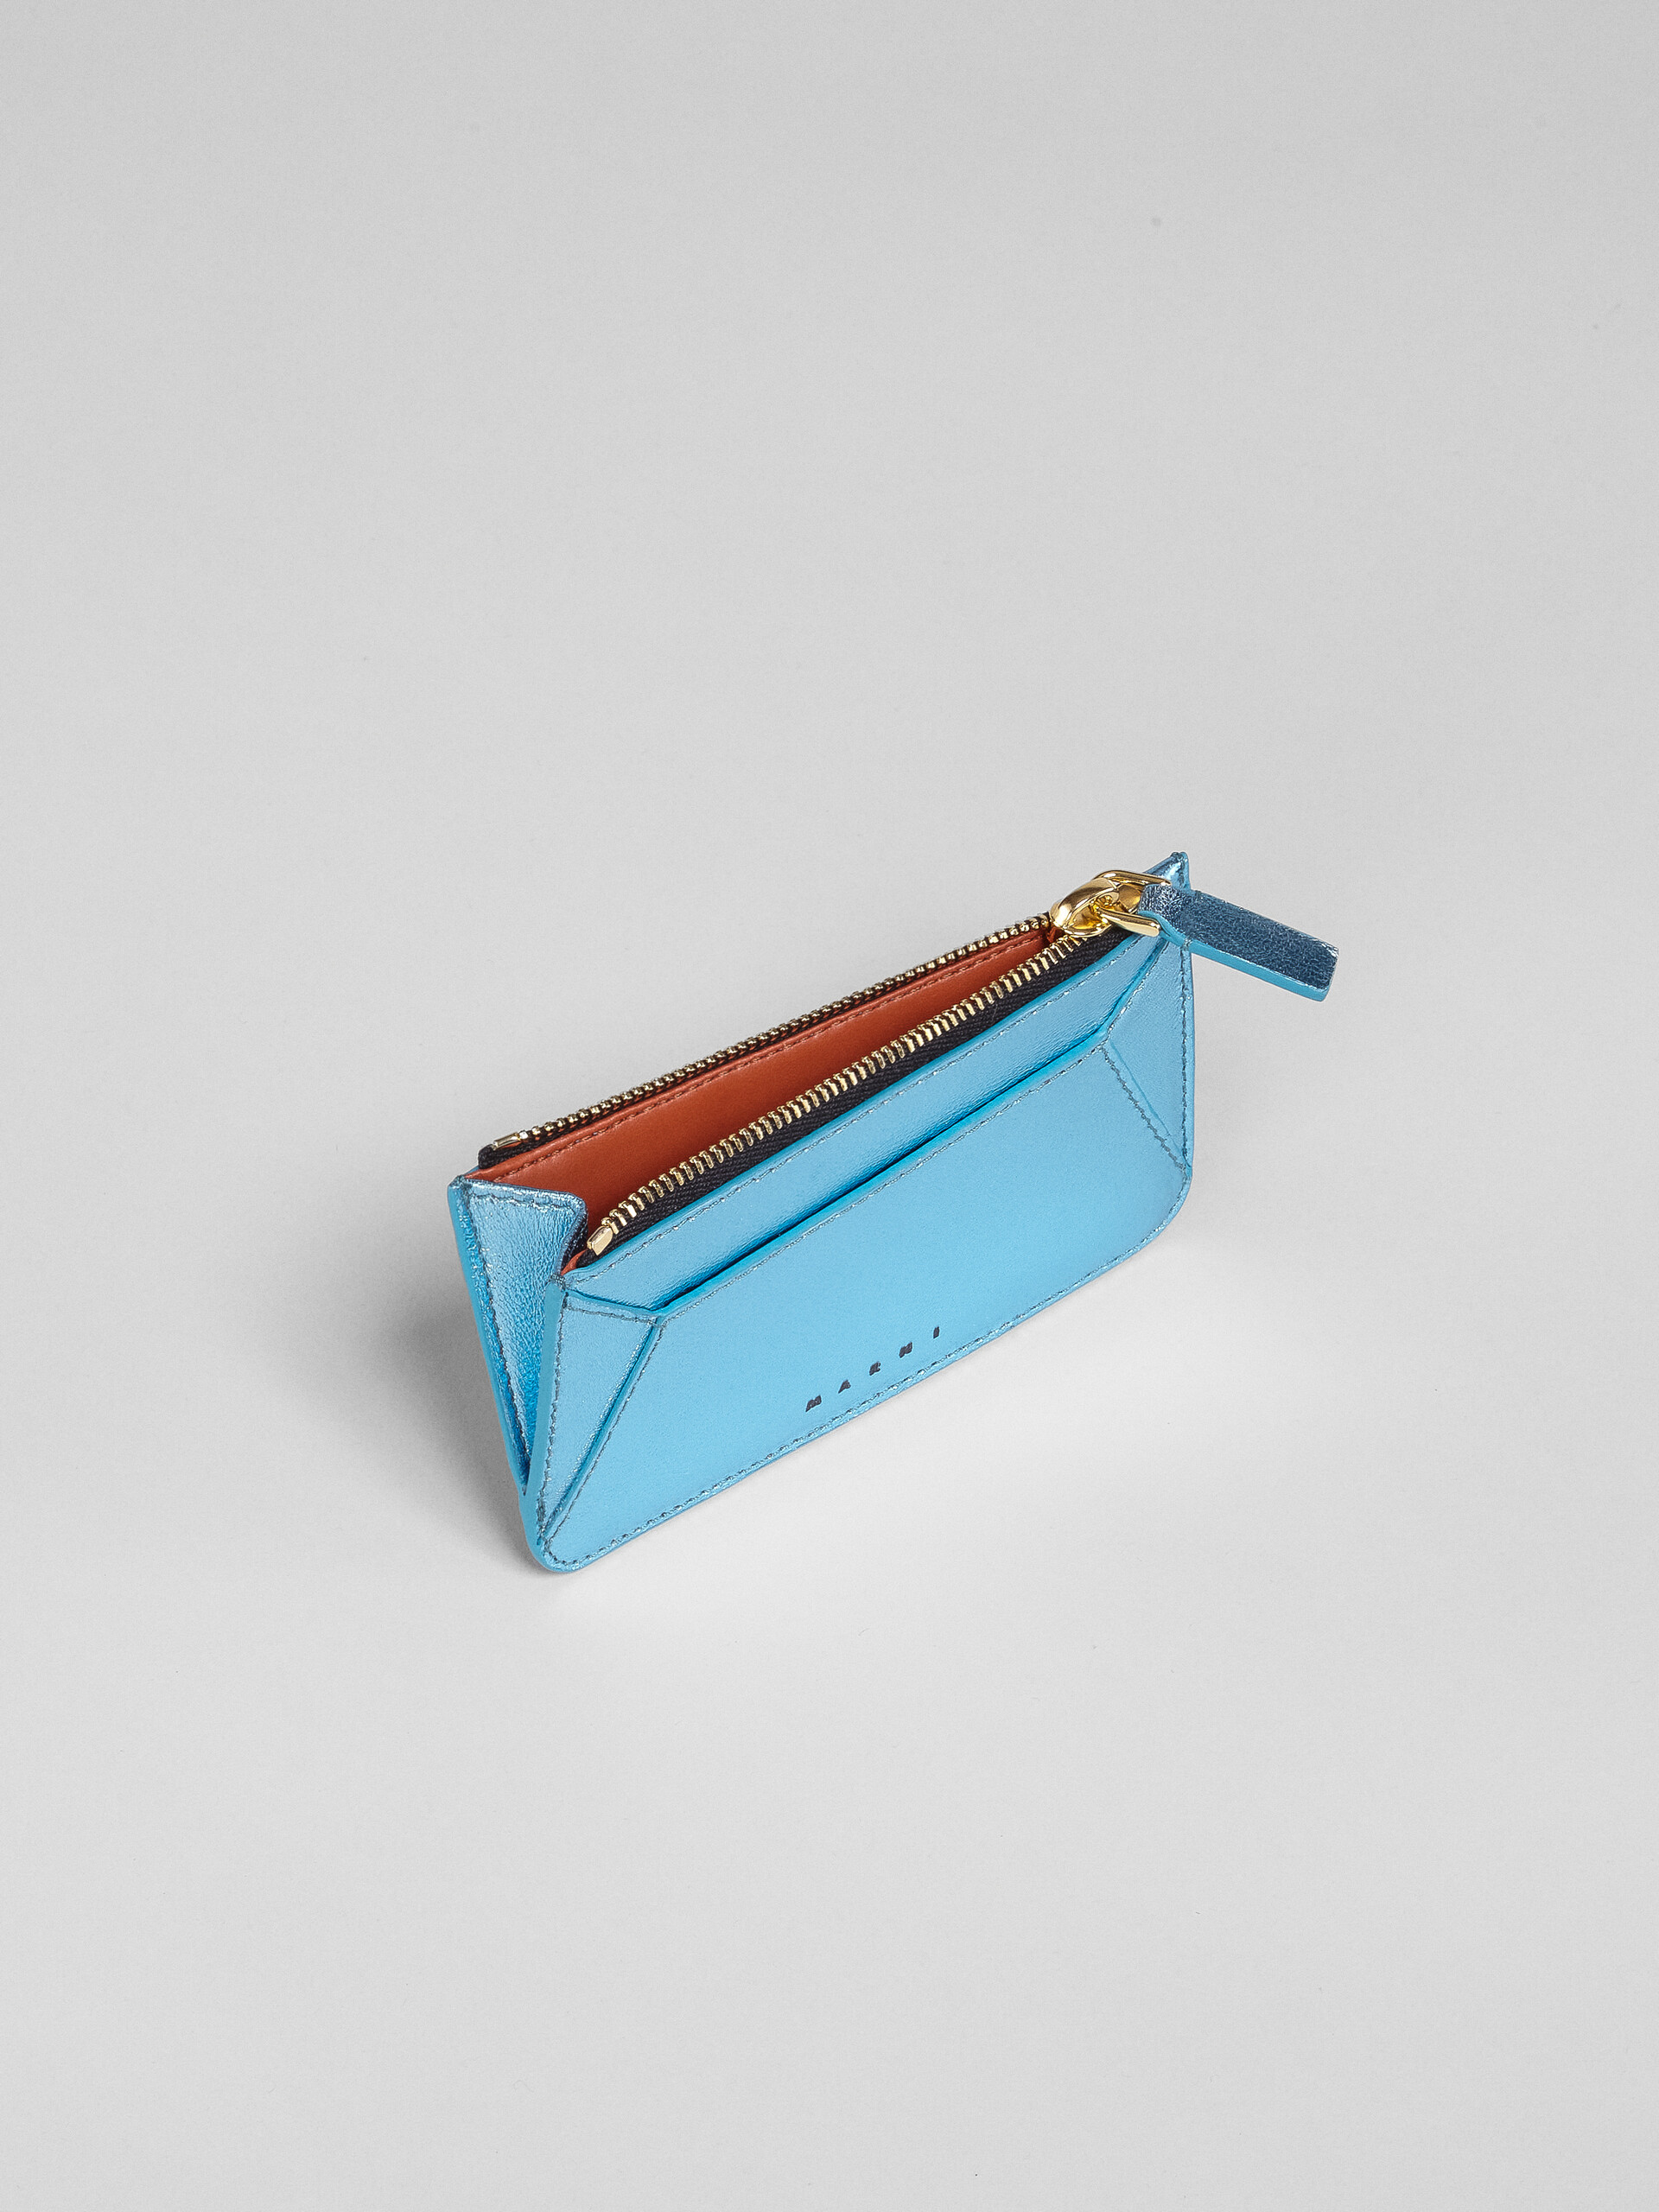 Pale blue metallic nappa leather card case - Wallets - Image 2